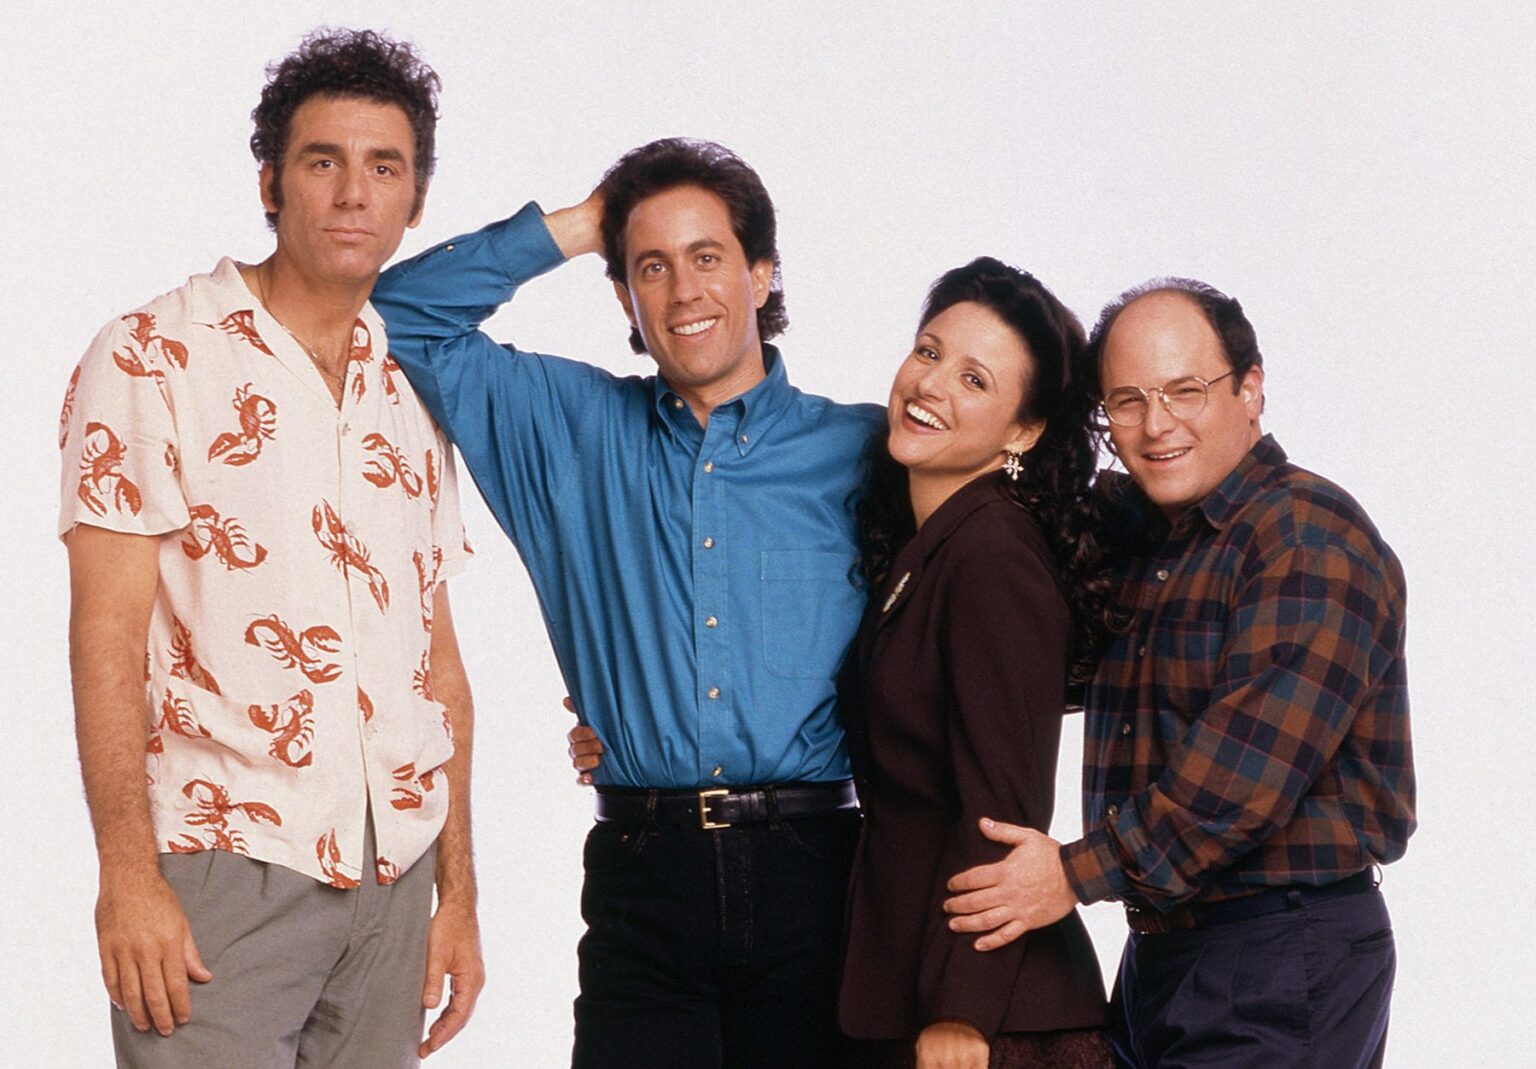 'Seinfeld' is one of those cult classic comedies that existed in the 90s. Here are the dark humor jokes which were featured throughout 'Seinfeld'.